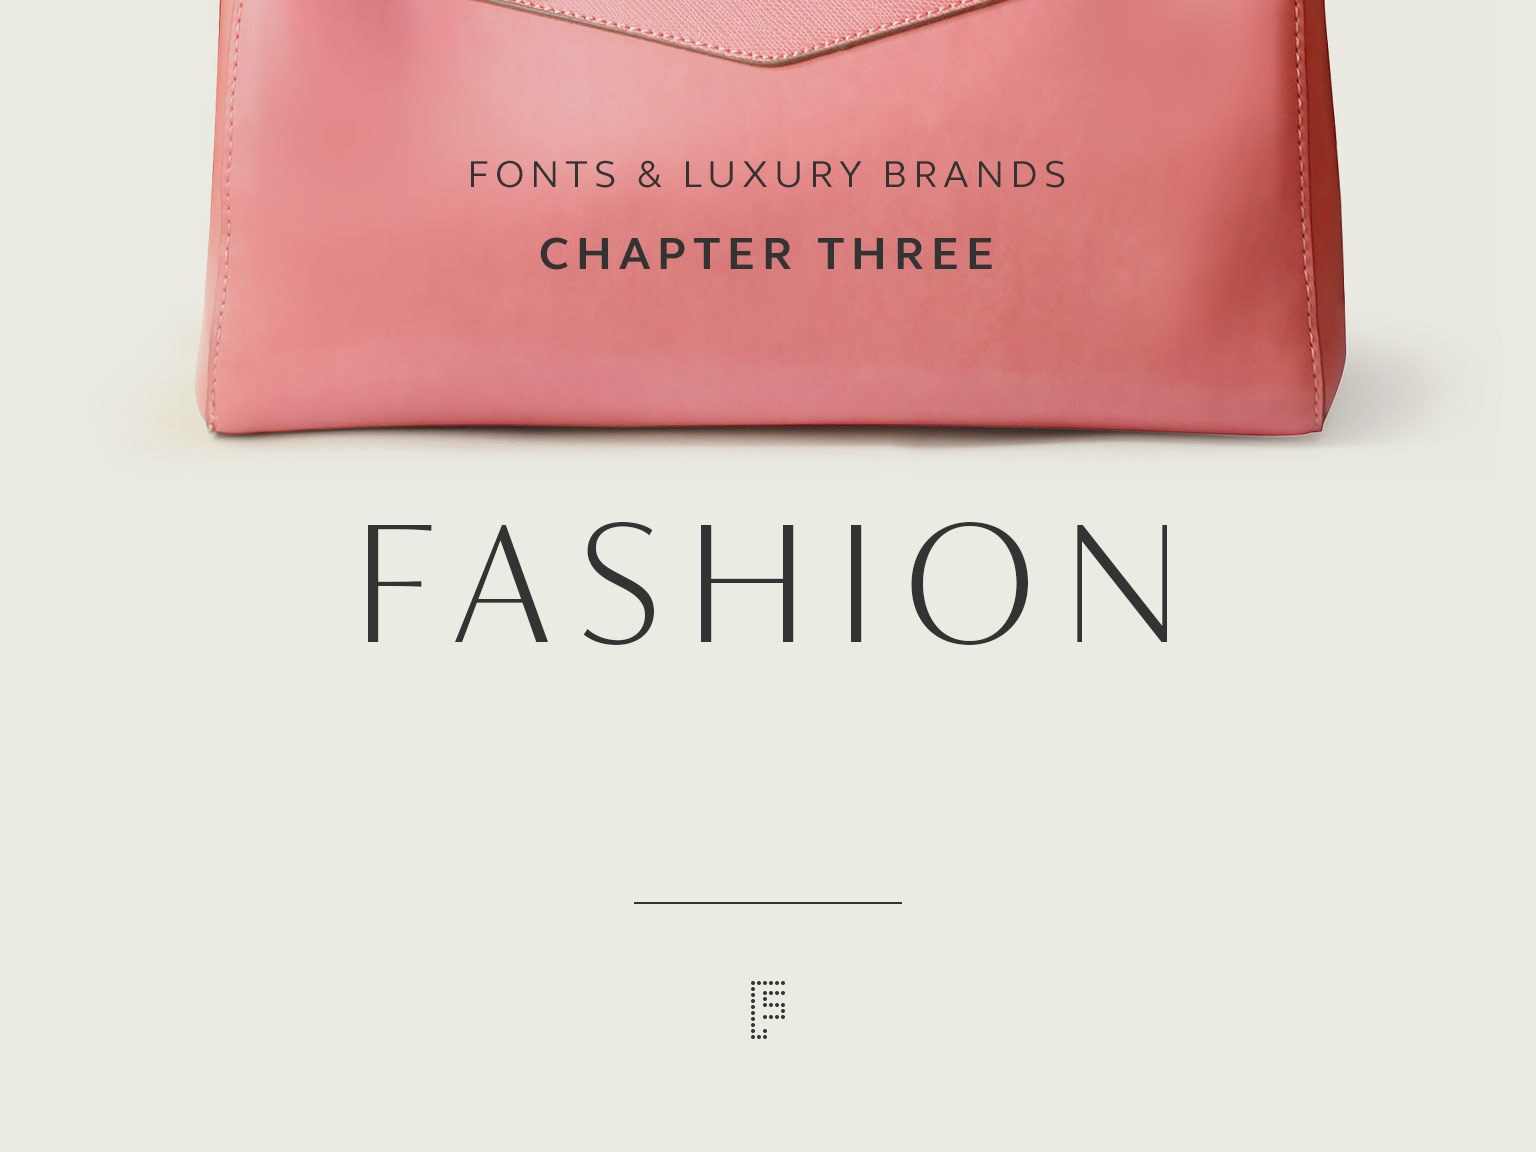 Fashion Fonts: An Inside Look into Elite Brands